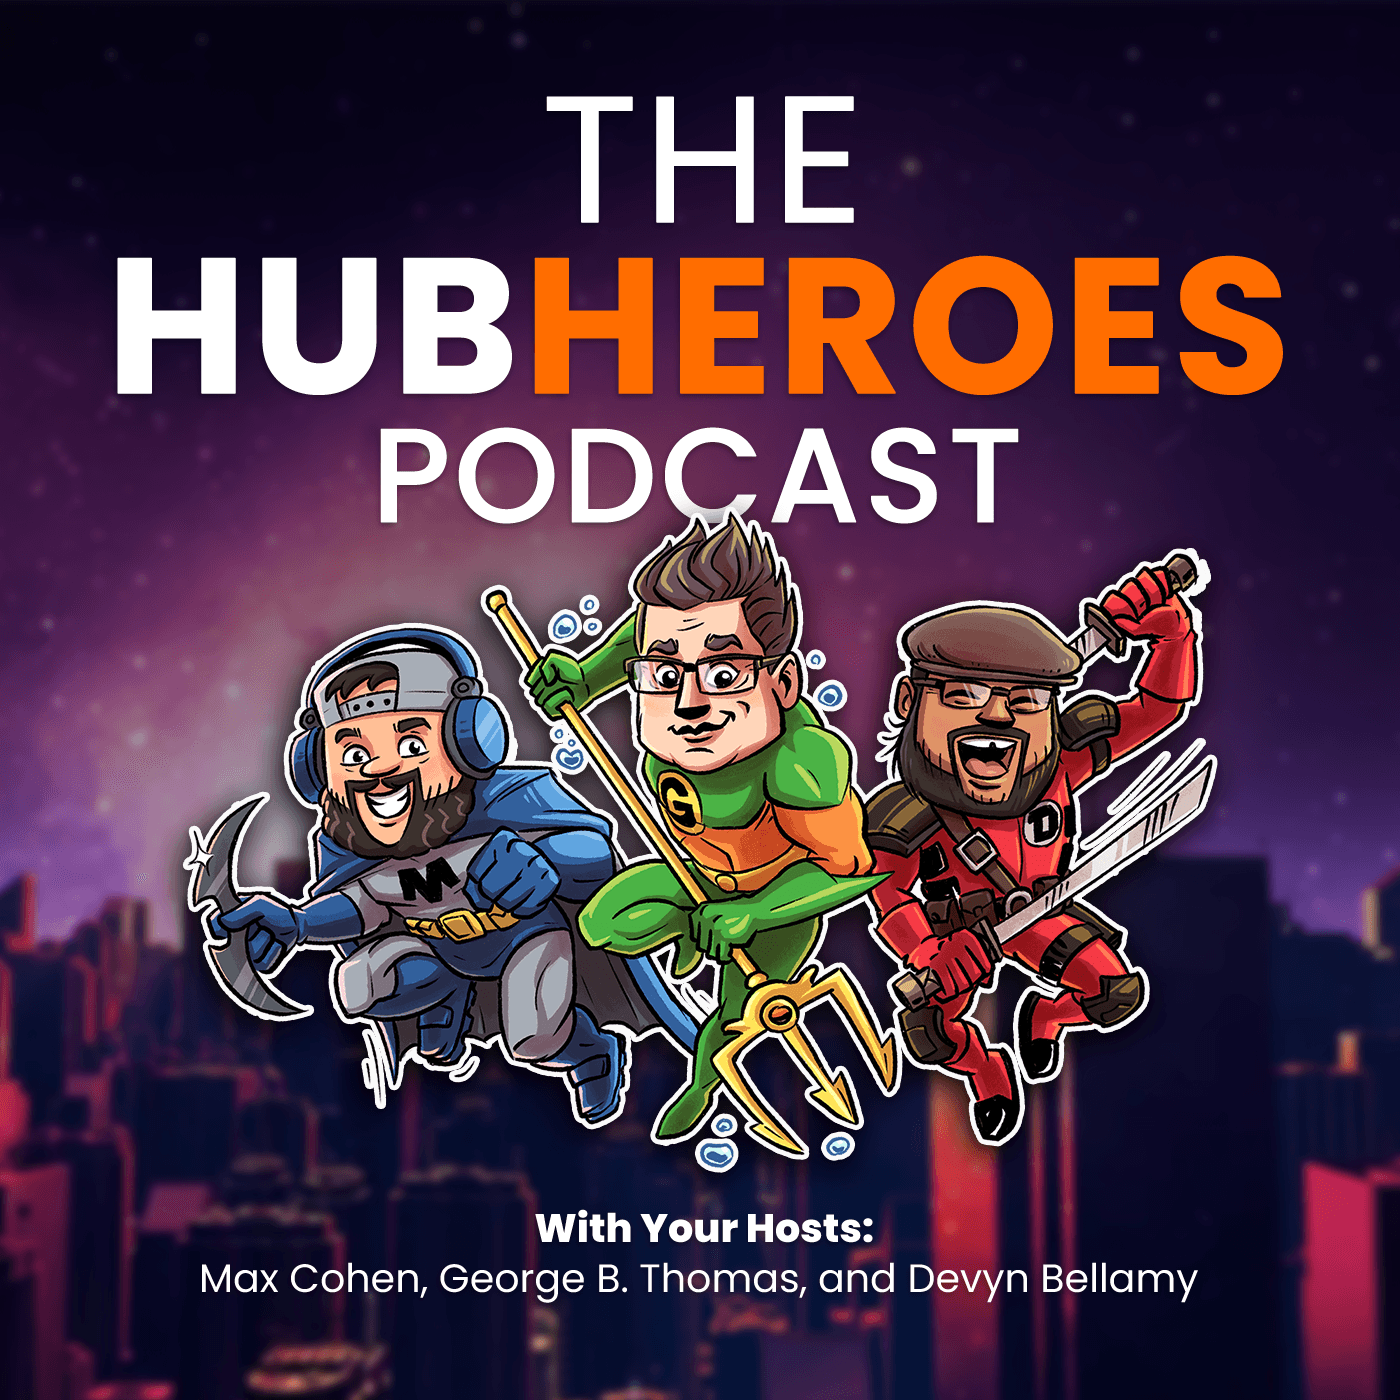 Change, discomfort, and growth; an unexpected fireside chat (HubHeroes, Ep. 14)